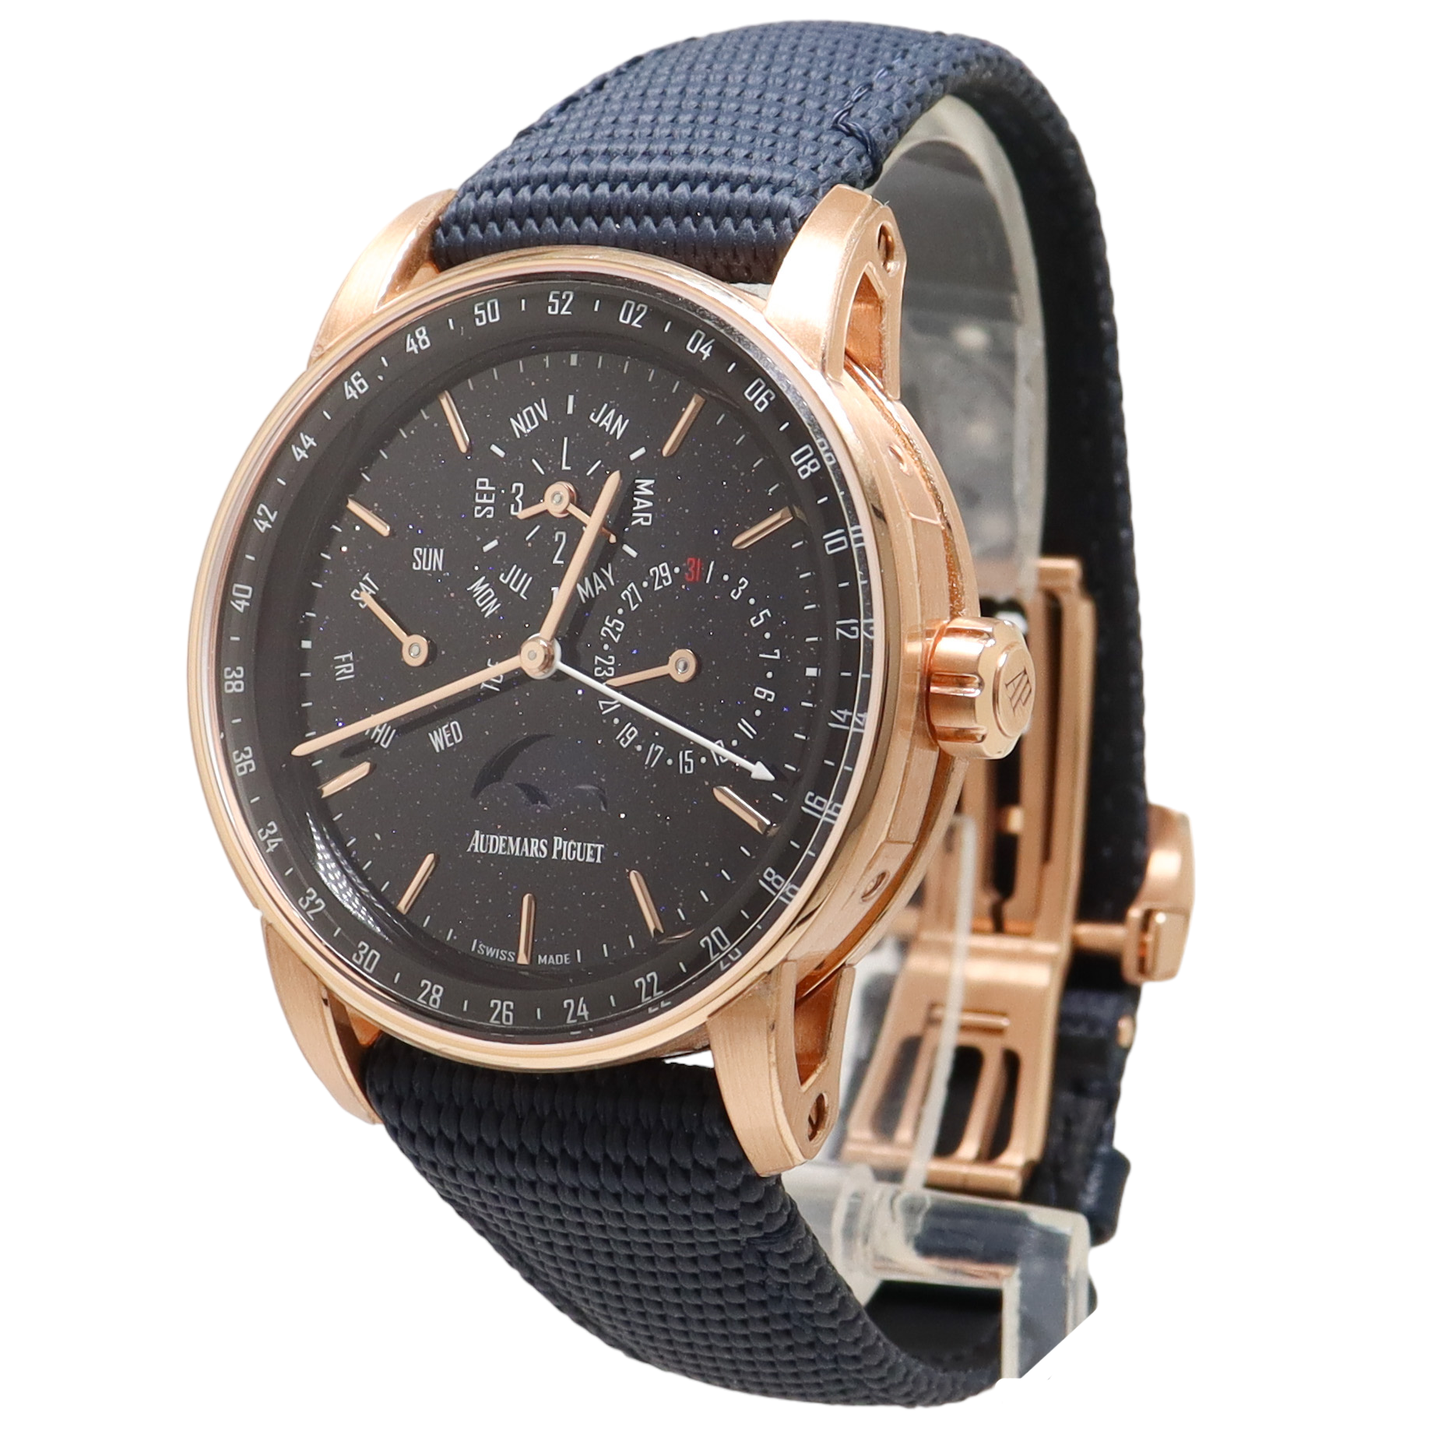 Load image into Gallery viewer, Audemars Piguet Code 11.59 Rose Gold Blue Aventurine Dial Watch Reference# 26394OR.OO.D321CR.01 - Happy Jewelers Fine Jewelry Lifetime Warranty
